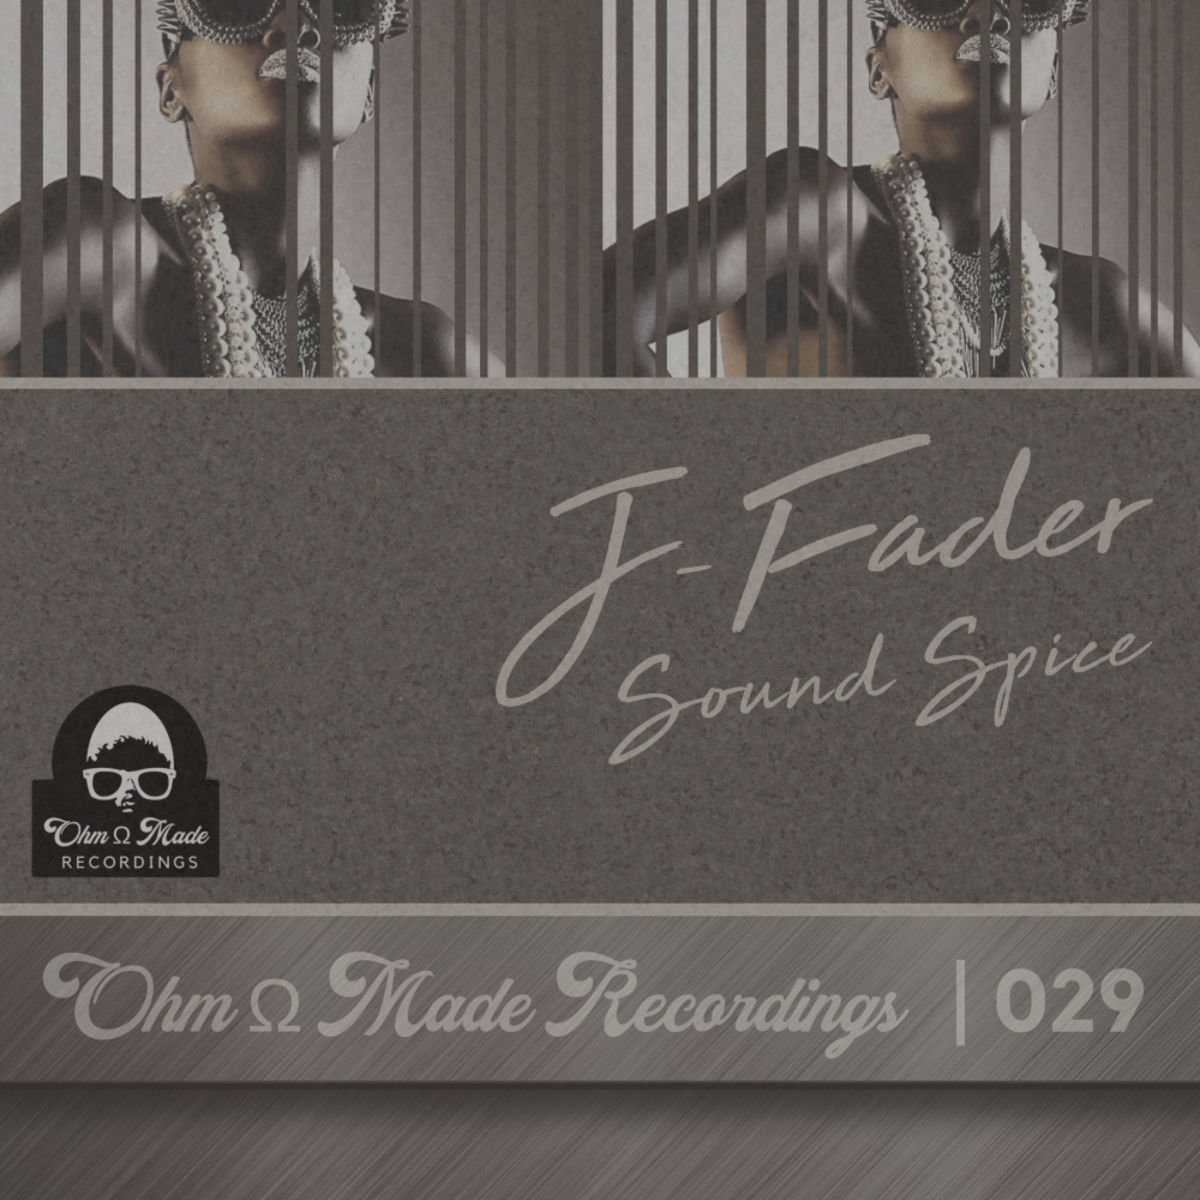 J-Fader - Sound Spice / Ohm Made Recordings